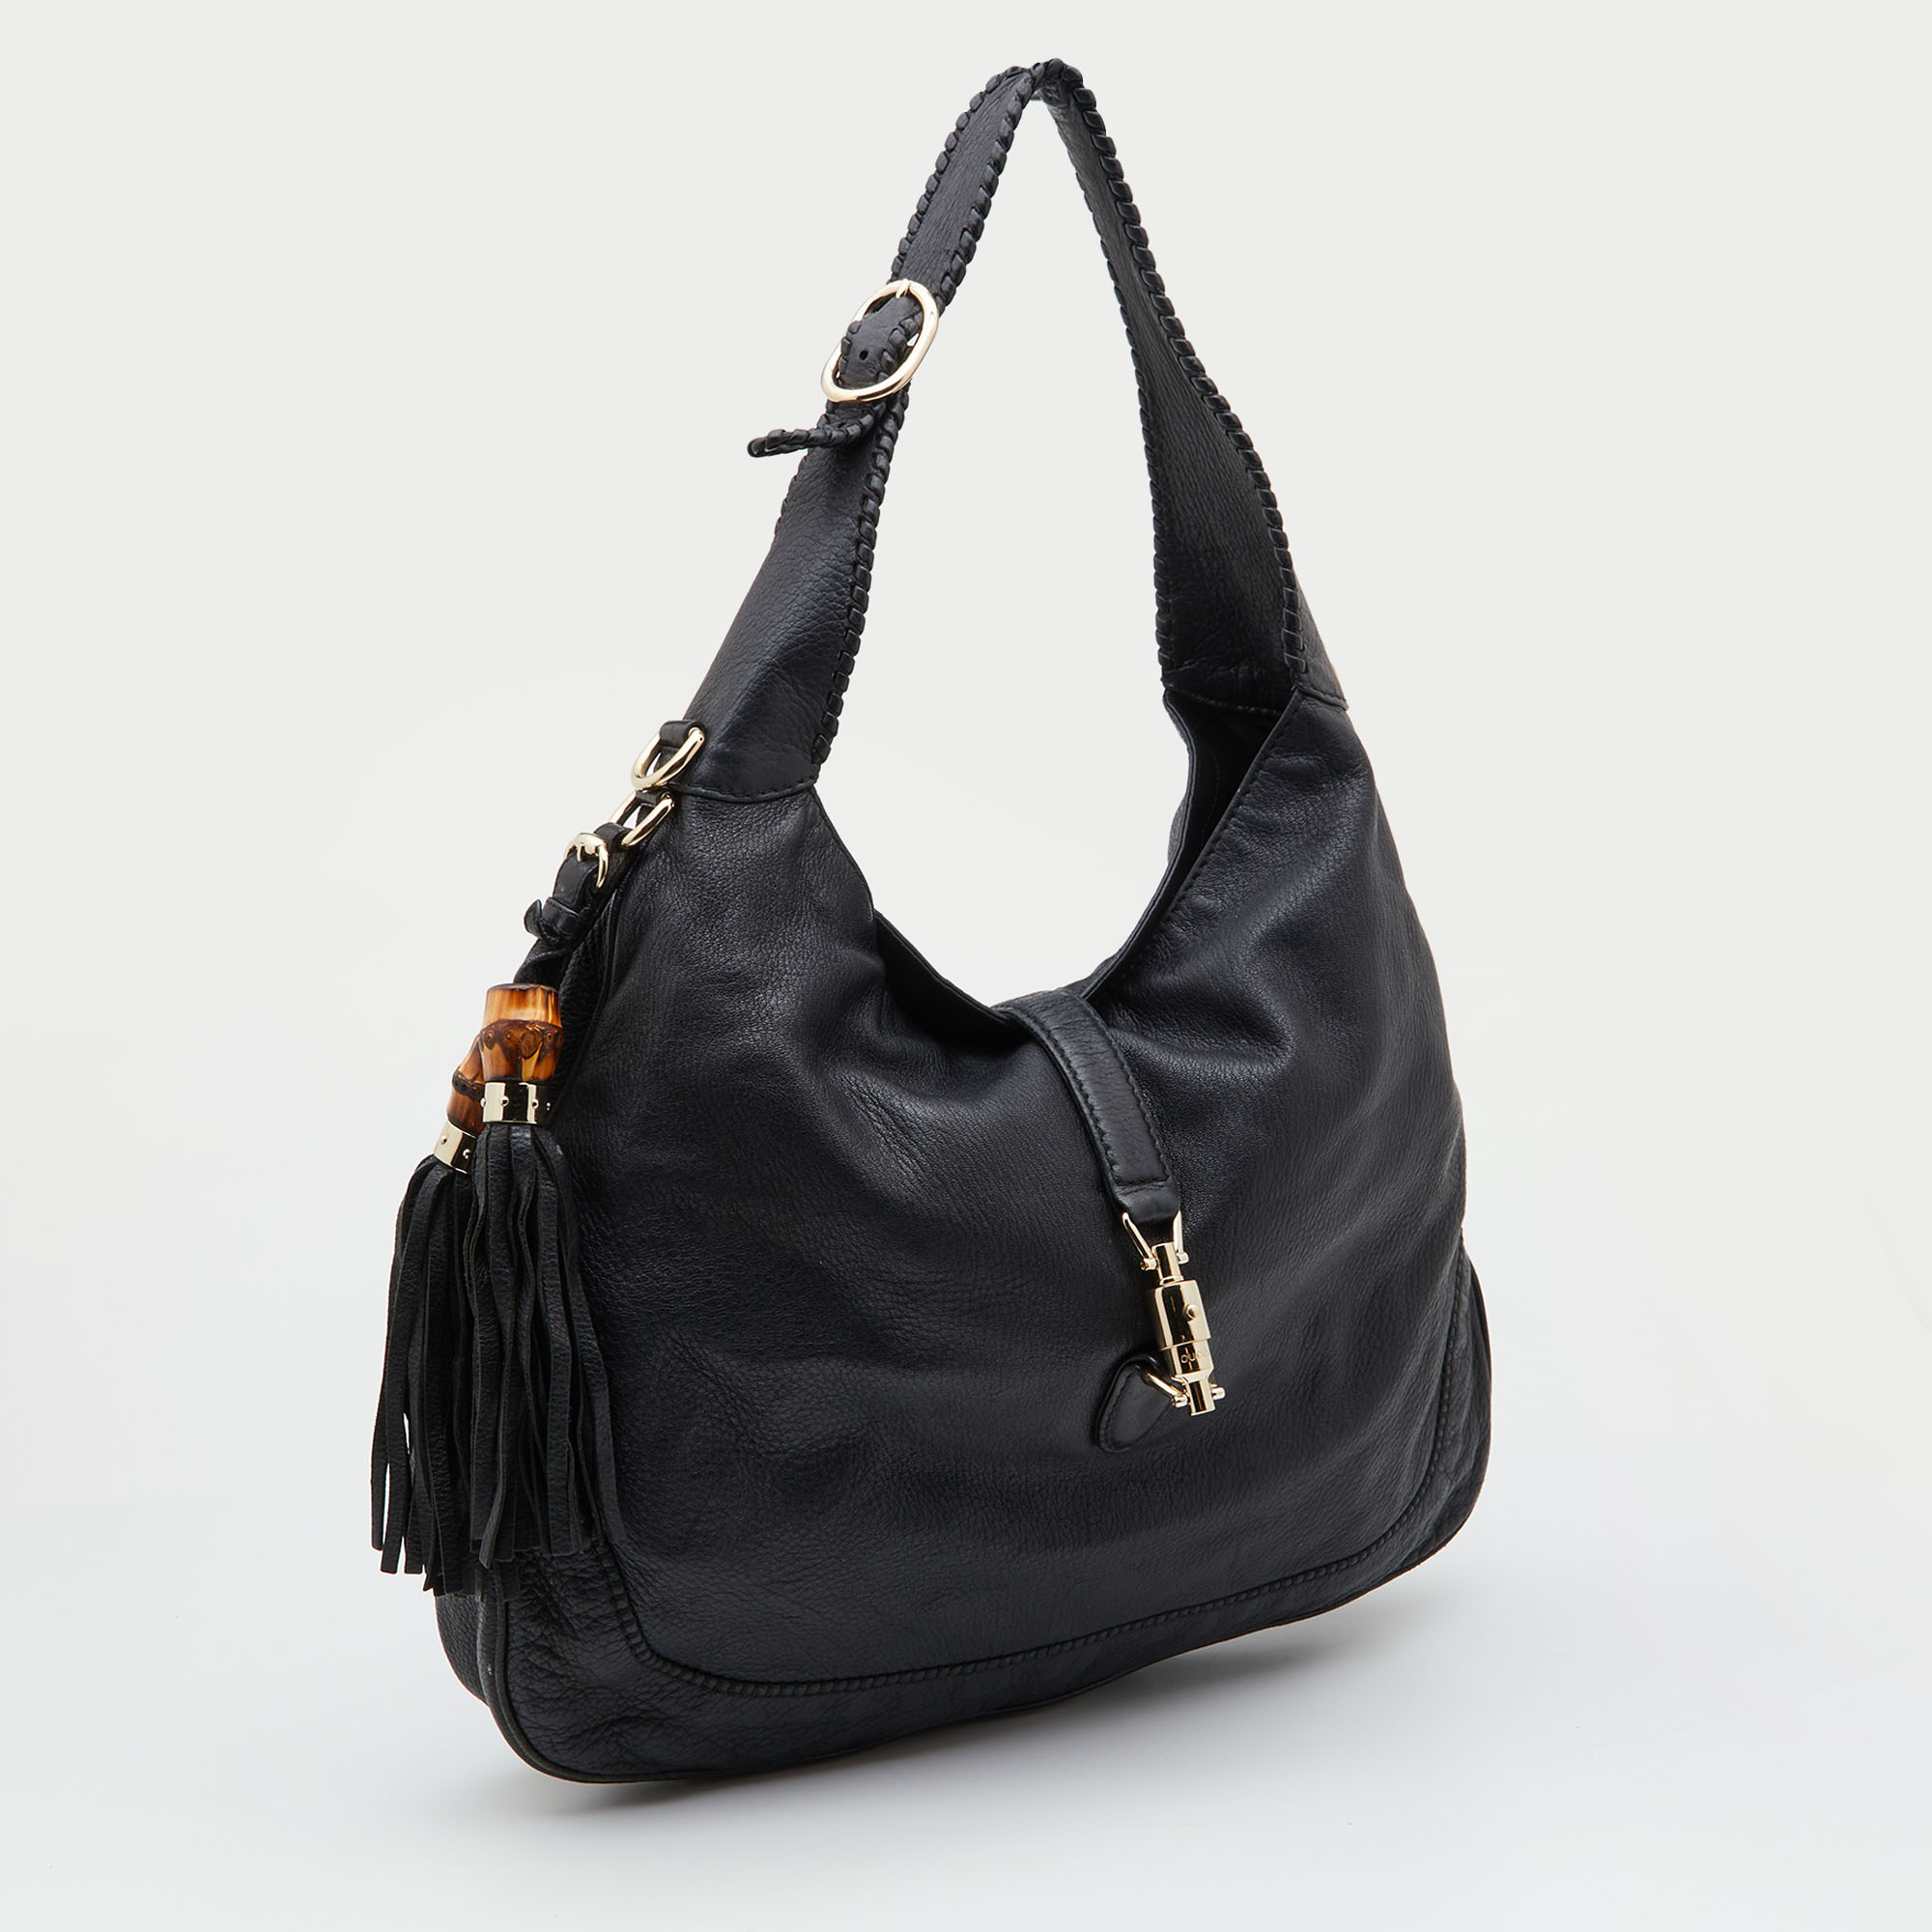 Gucci Black Leather New Jackie Hobo